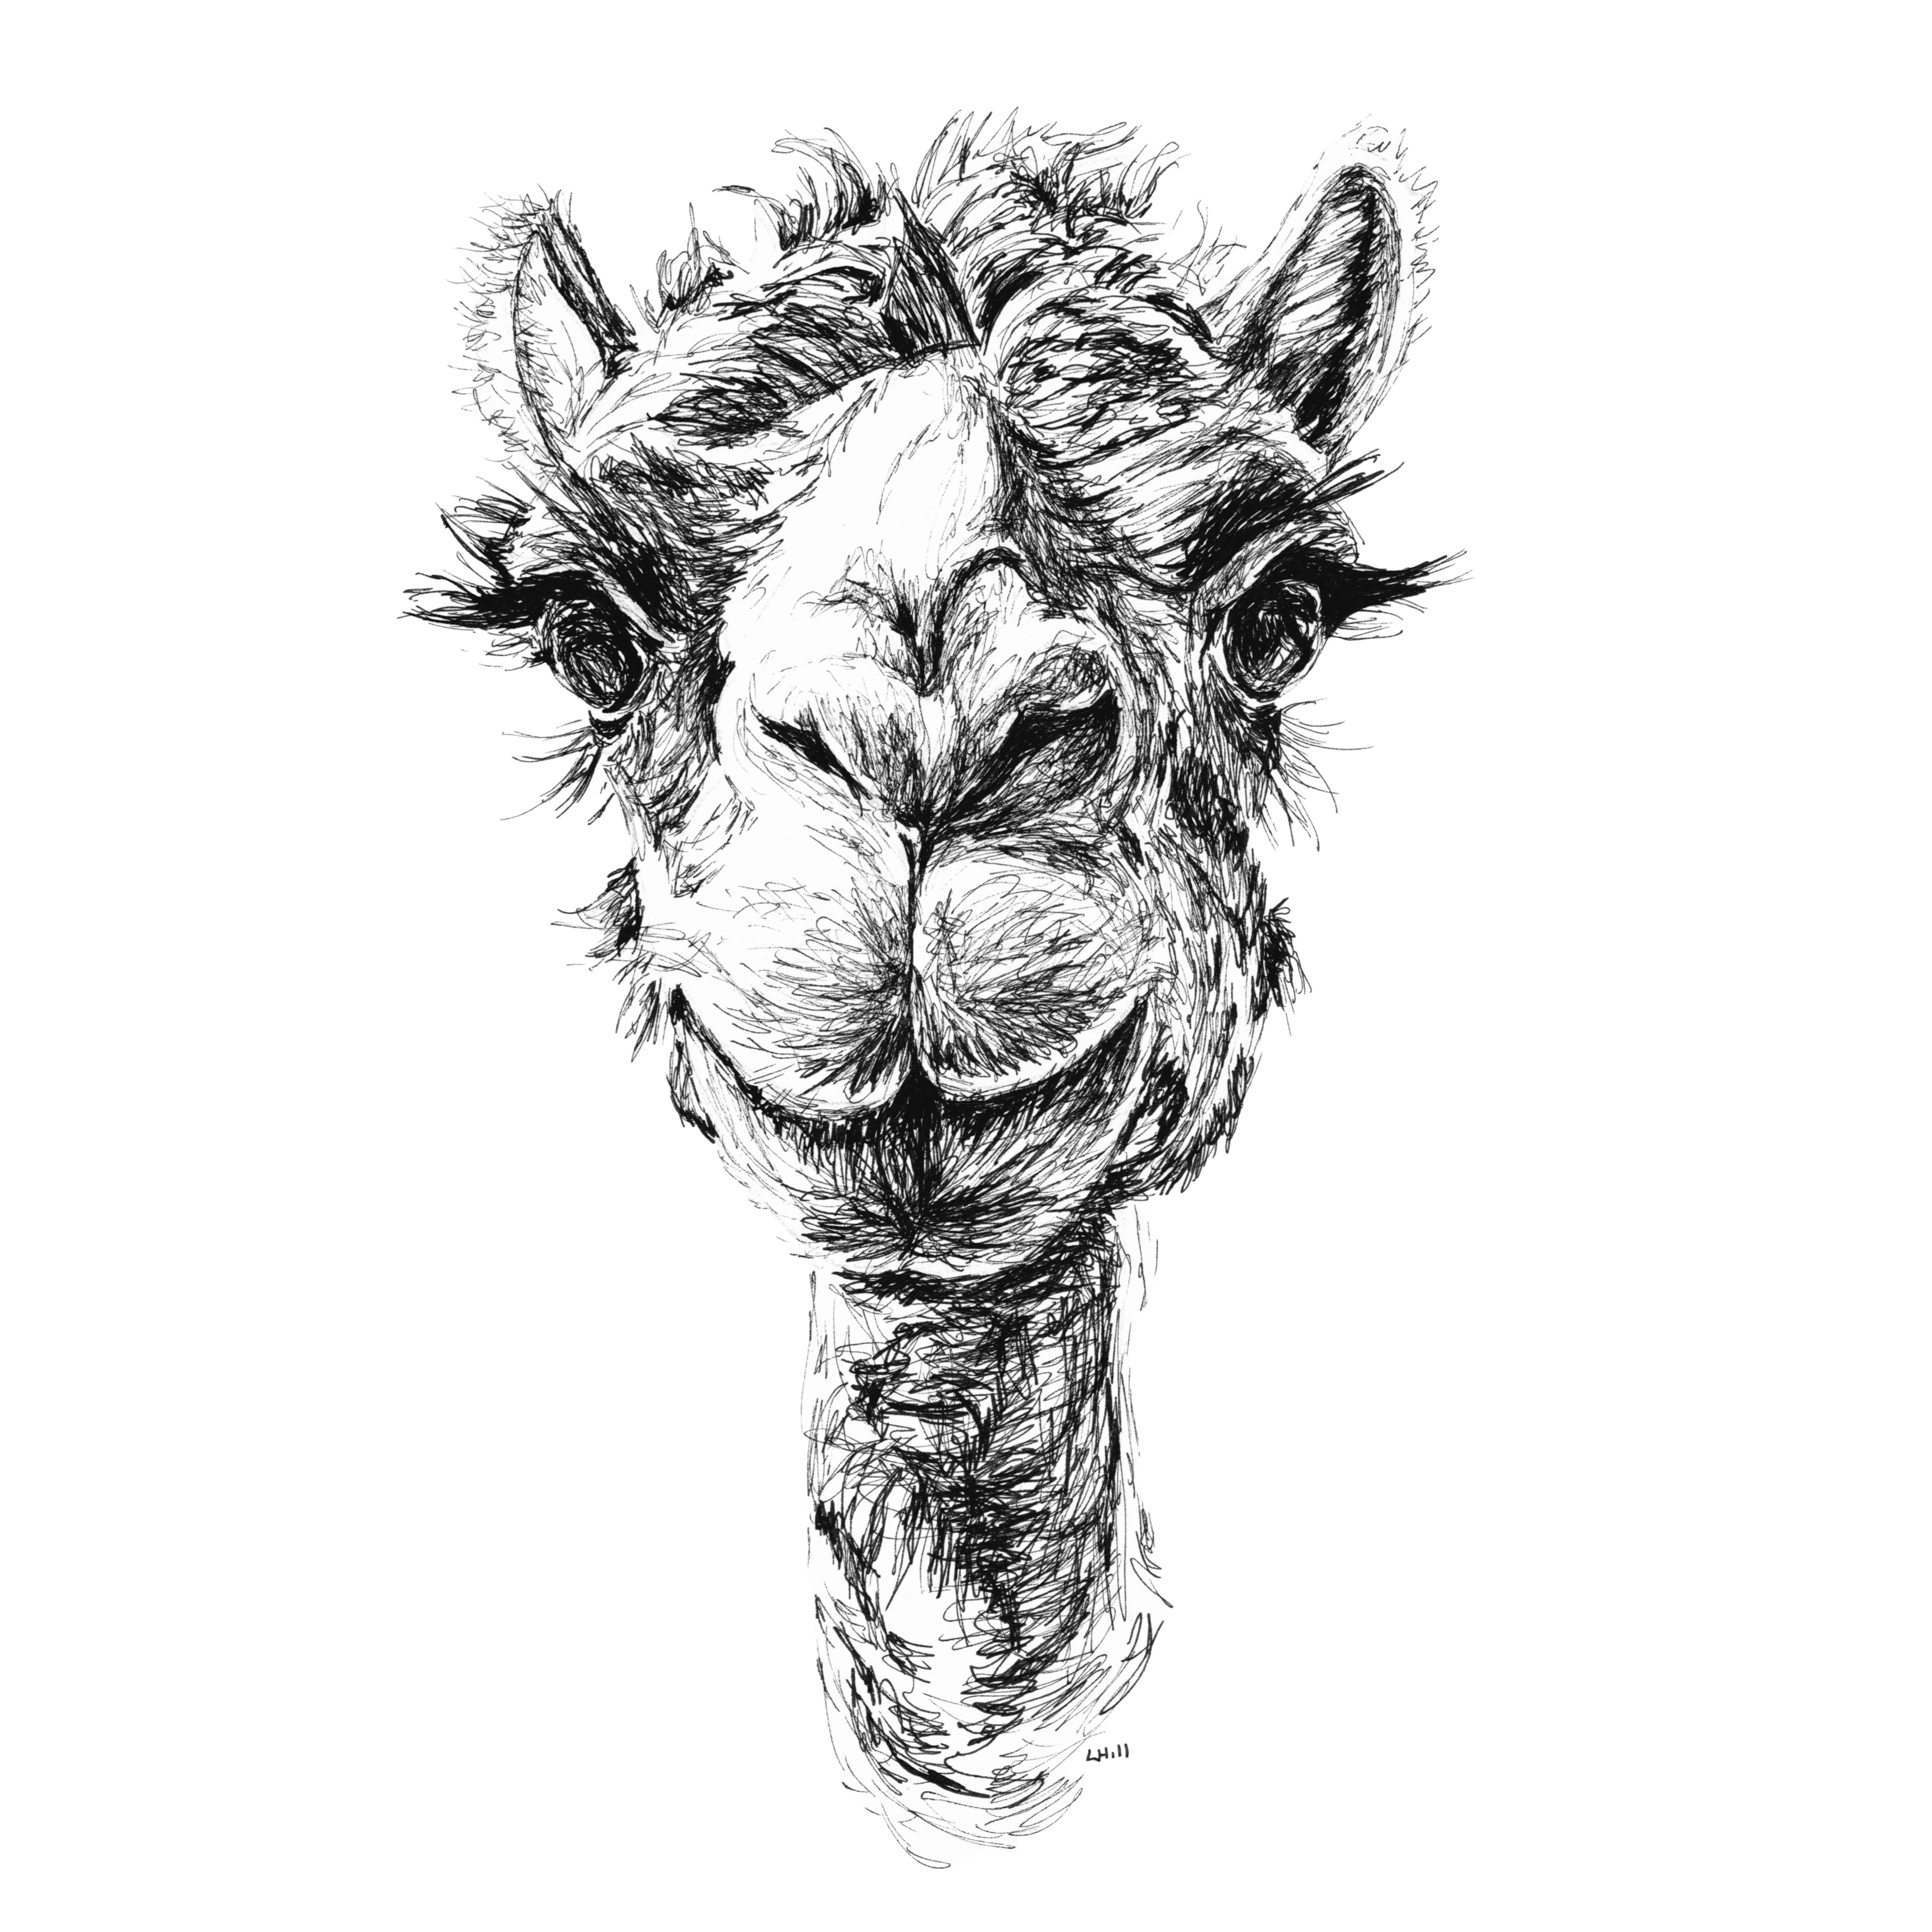 Camel pen and ink illustration by Louisa Hill